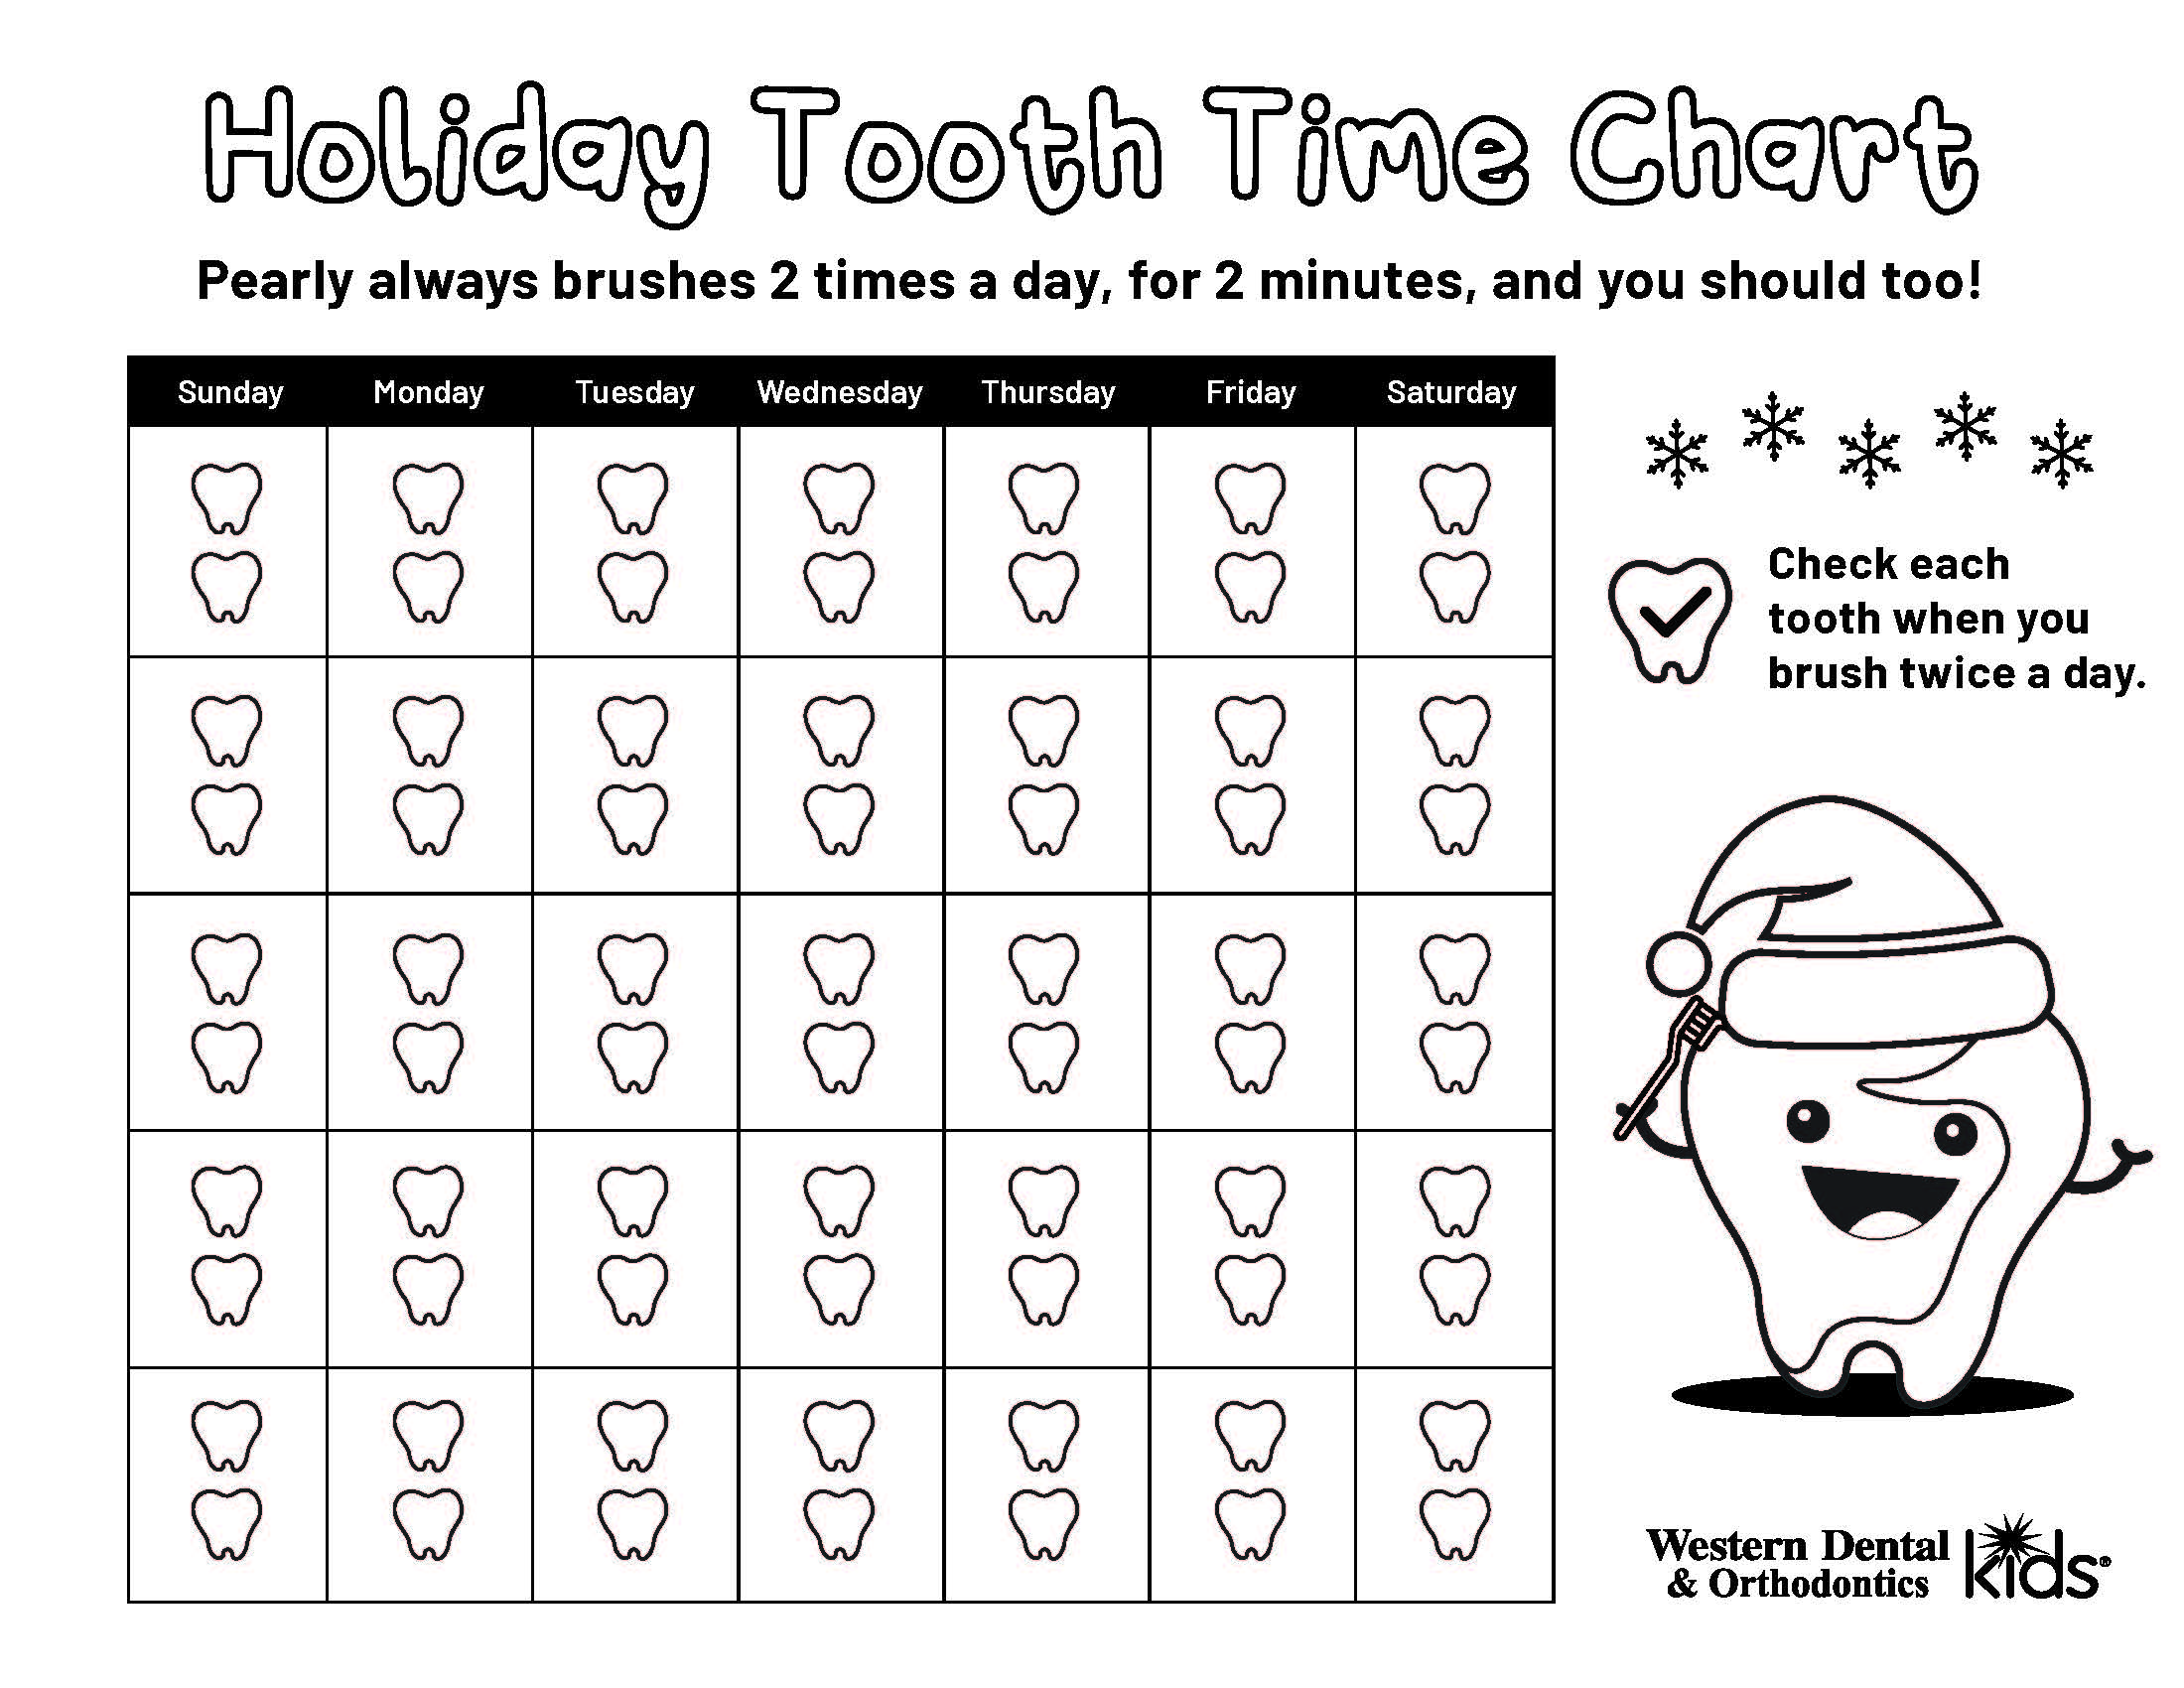 Western Dental Kids - Holiday Tooth Time Chart